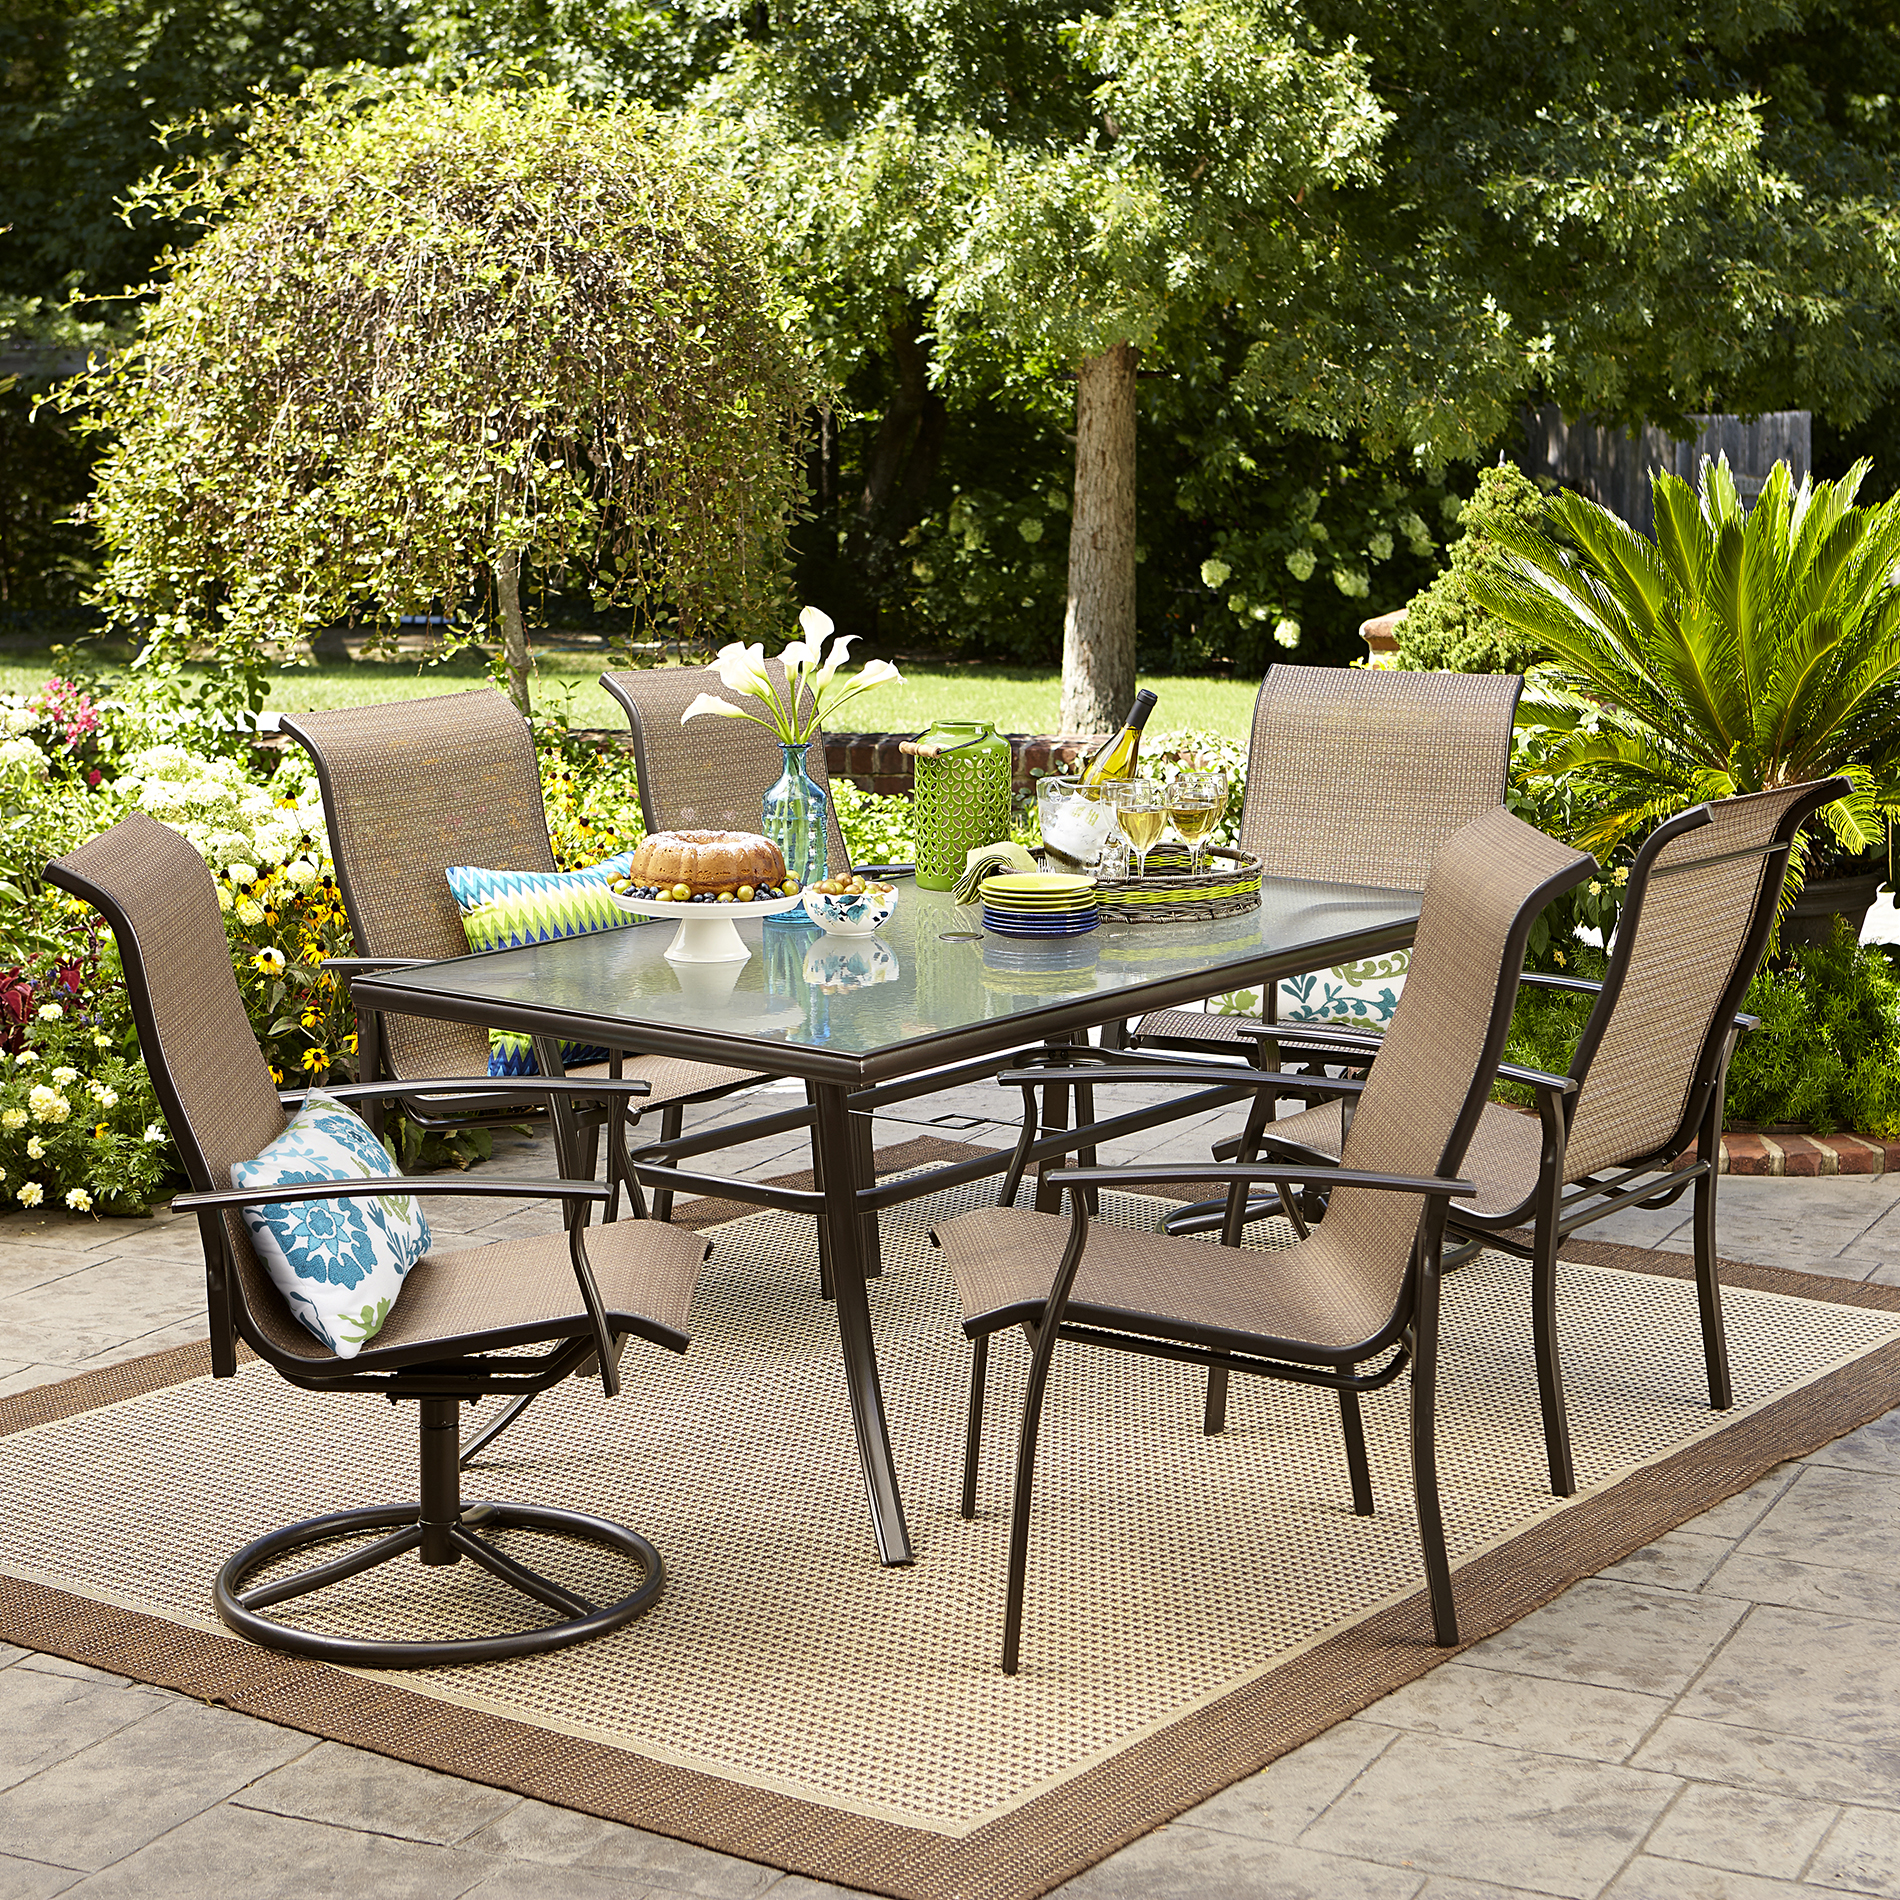 Garden Oasis Harrison 7 pc. Textured GlassTop Dining Set *Limited Availability